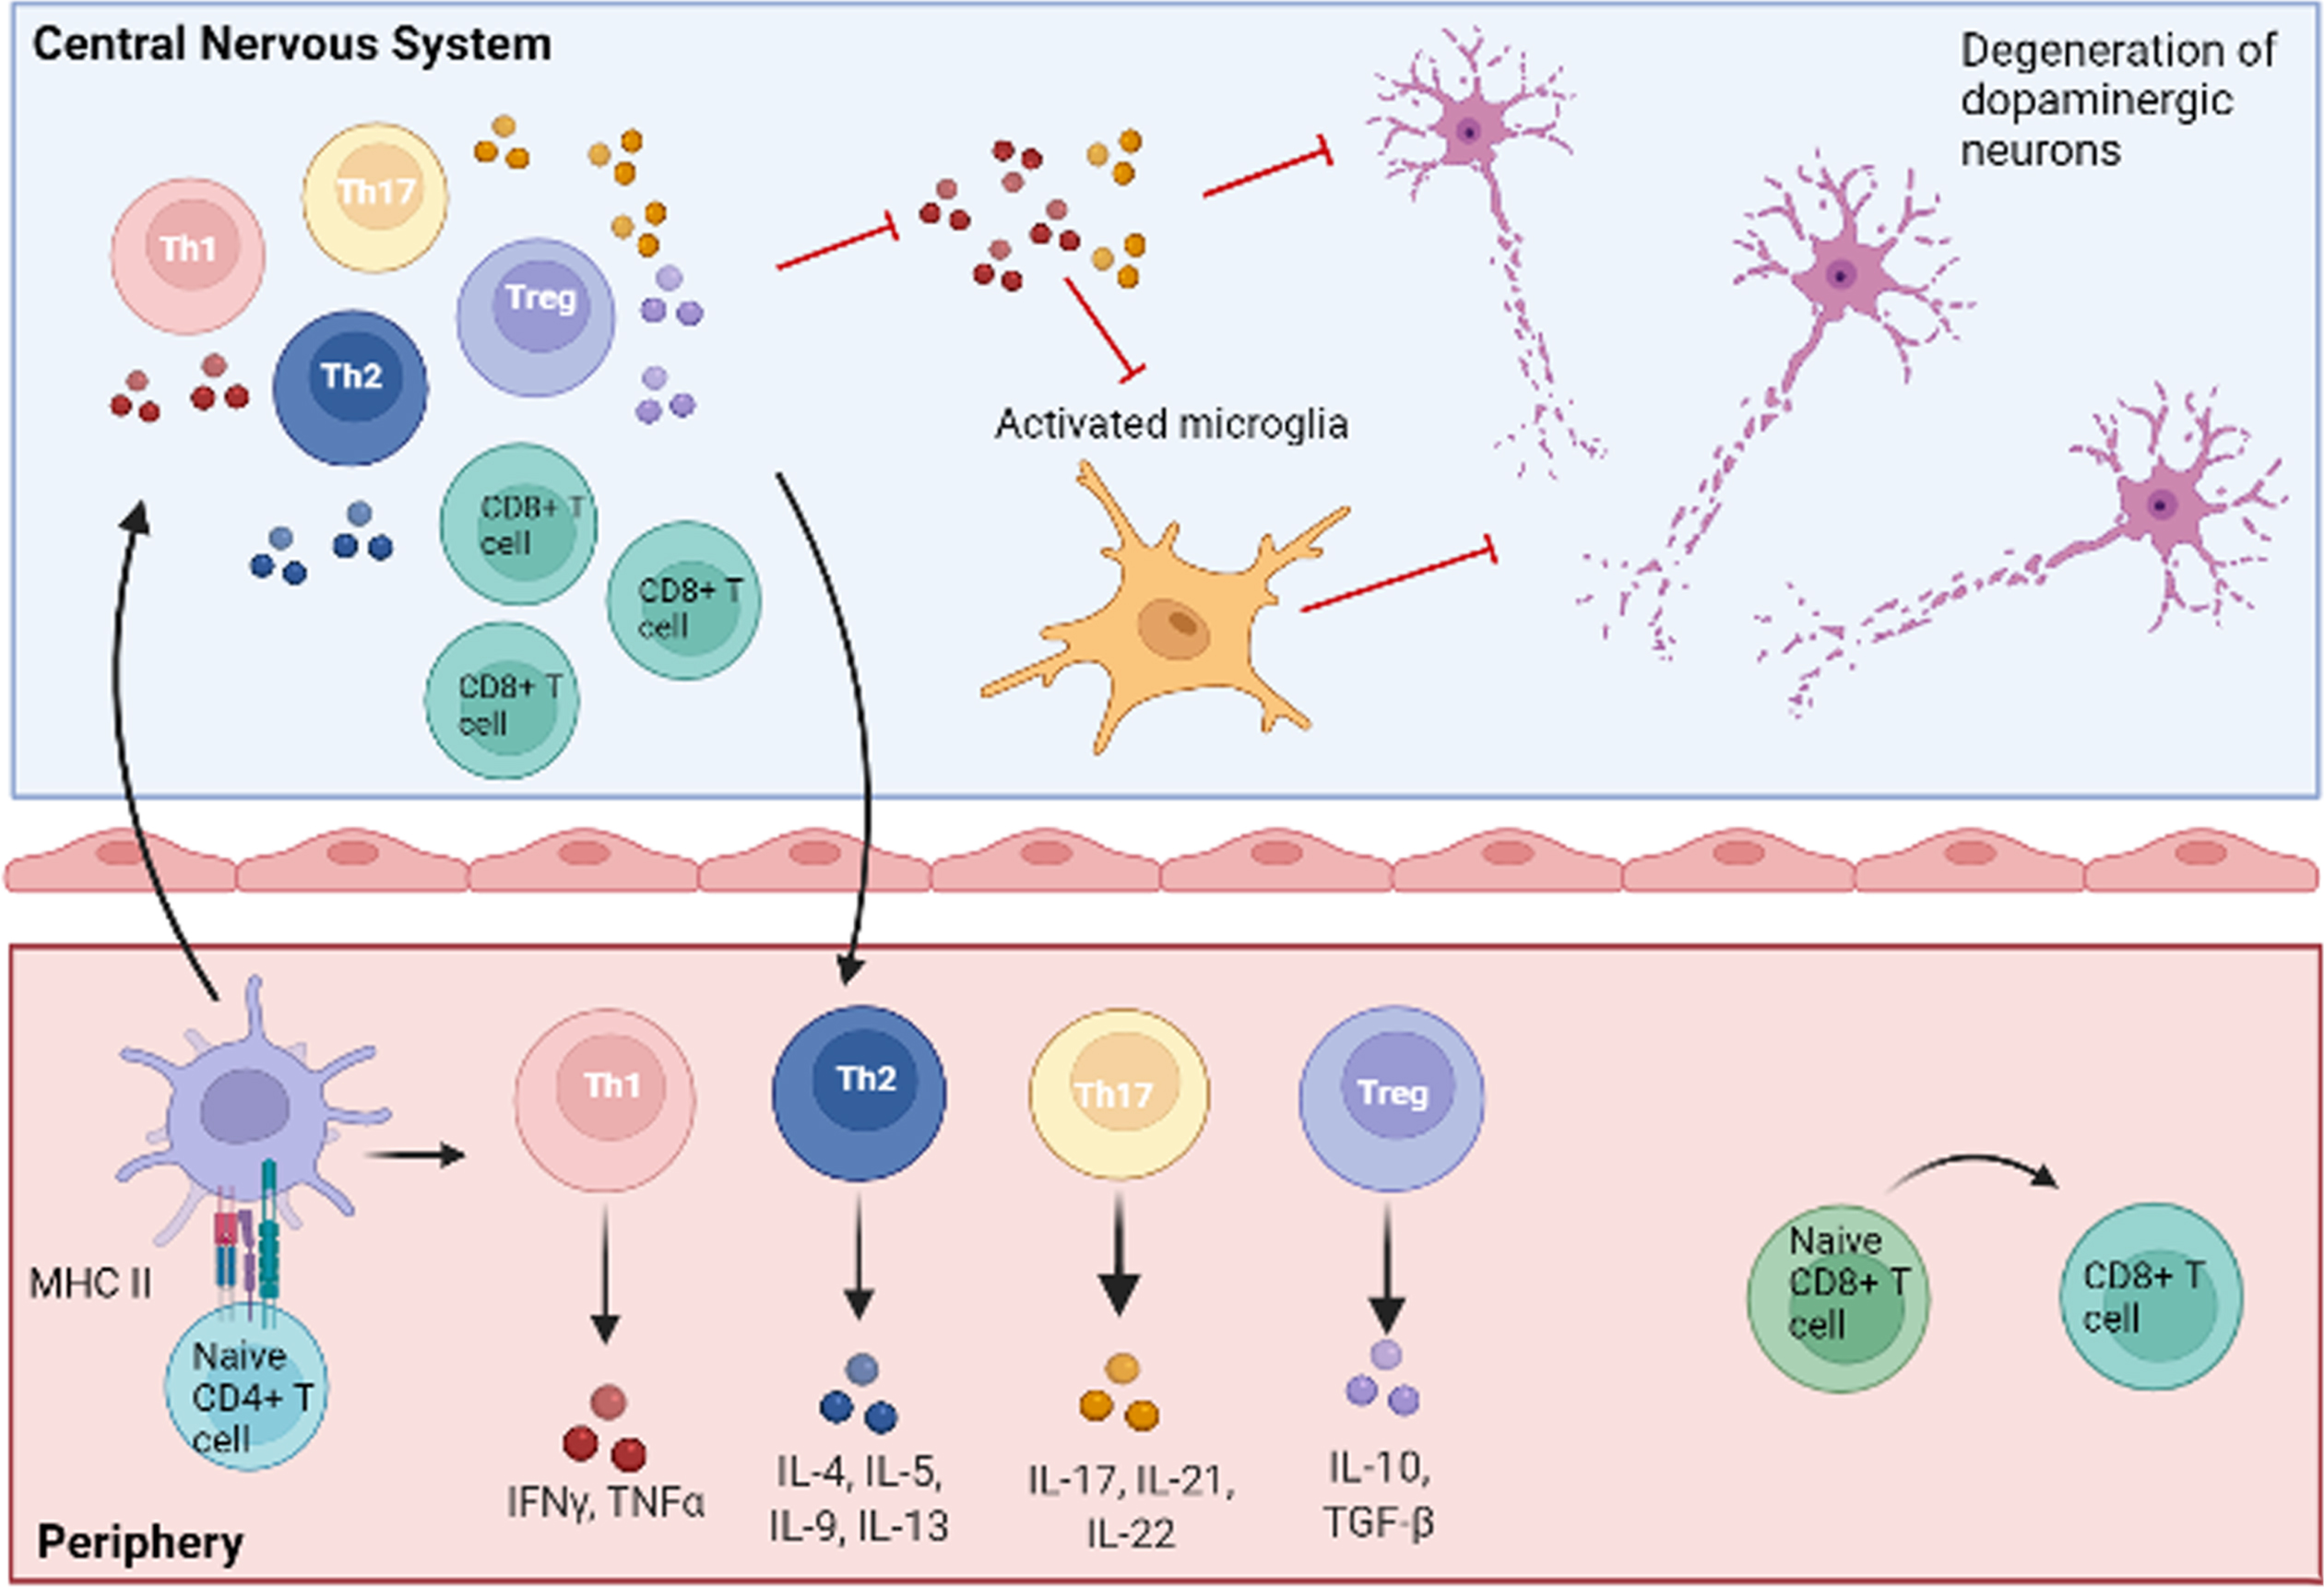 Central and peripheral involvement of T cells in PD. Naïve CD4 + and CD8 + T lymphocytes are activated in the periphery after the interaction with antigen-presenting cells. CD4 + T cells then differentiate into pro-inflammatory (Th1, Th17) or anti-inflammatory (Th2, Treg) subtypes, characterized by the release of specific patterns of cytokines. Activated T cells can reach the central nervous system by crossing an altered blood-brain barrier, thus polarizing resident cells to pro-inflammatory or anti-inflammatory phenotypes. In particular, Th1 and Th17 subsets release pro-inflammatory molecules (TNF-α, IFN-γ, IL-17, IL-21, IL-22), which, in concert with other mechanisms, lead to neuronal damage and death. Detrimental pro-inflammatory pathways are indicated with red lines. Figure created with BioRender.com.